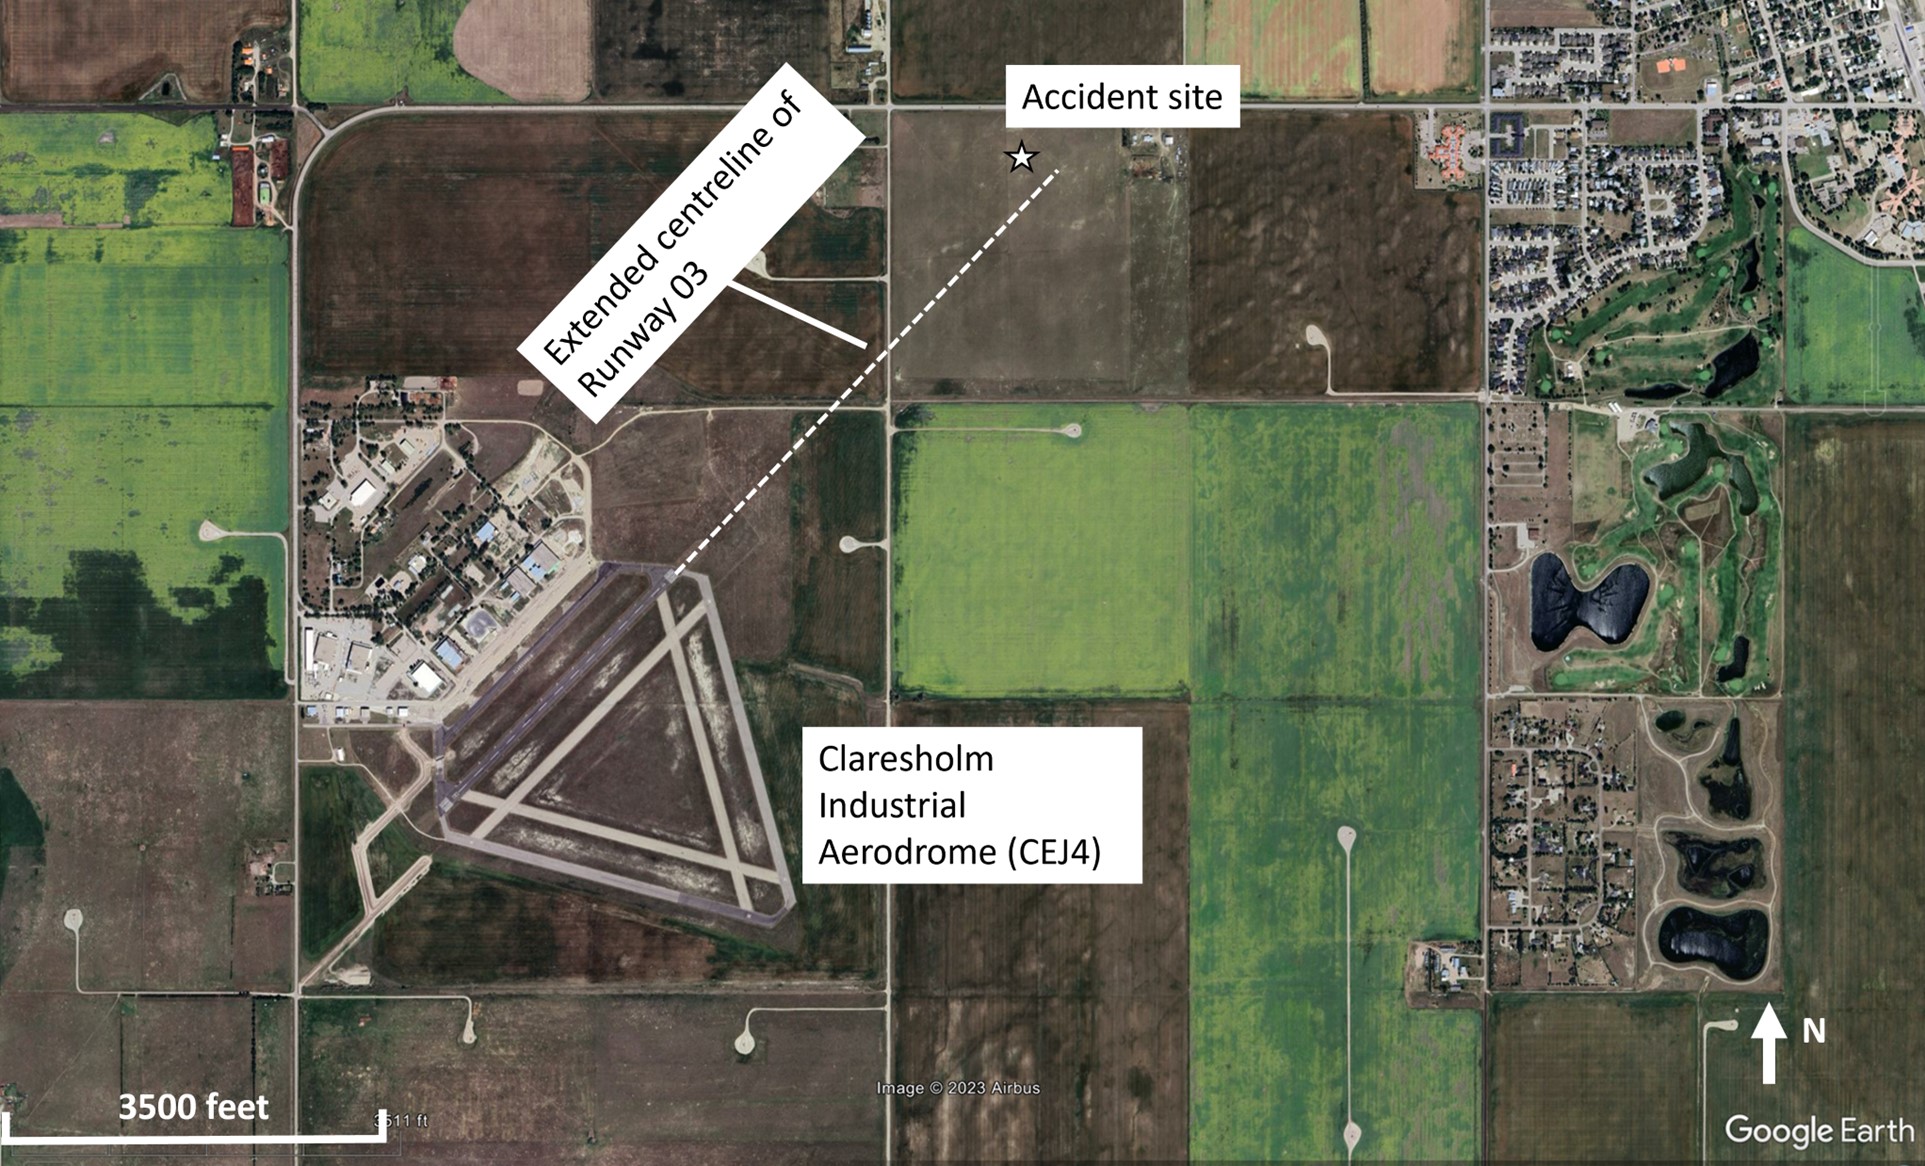 Map showing the aerodrome and accident location (Source: Google Earth, with TSB annotations)